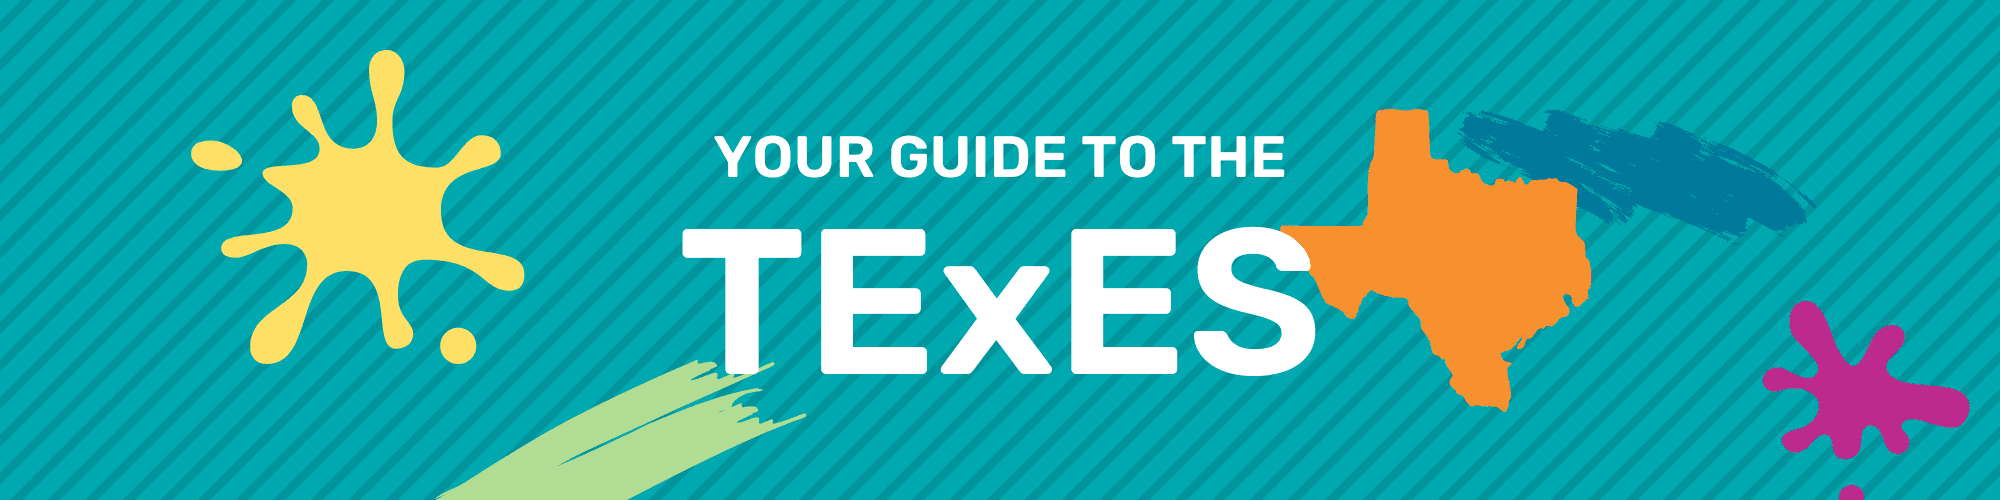 The words "Your Guide to the TExES" against a background with paint splatters